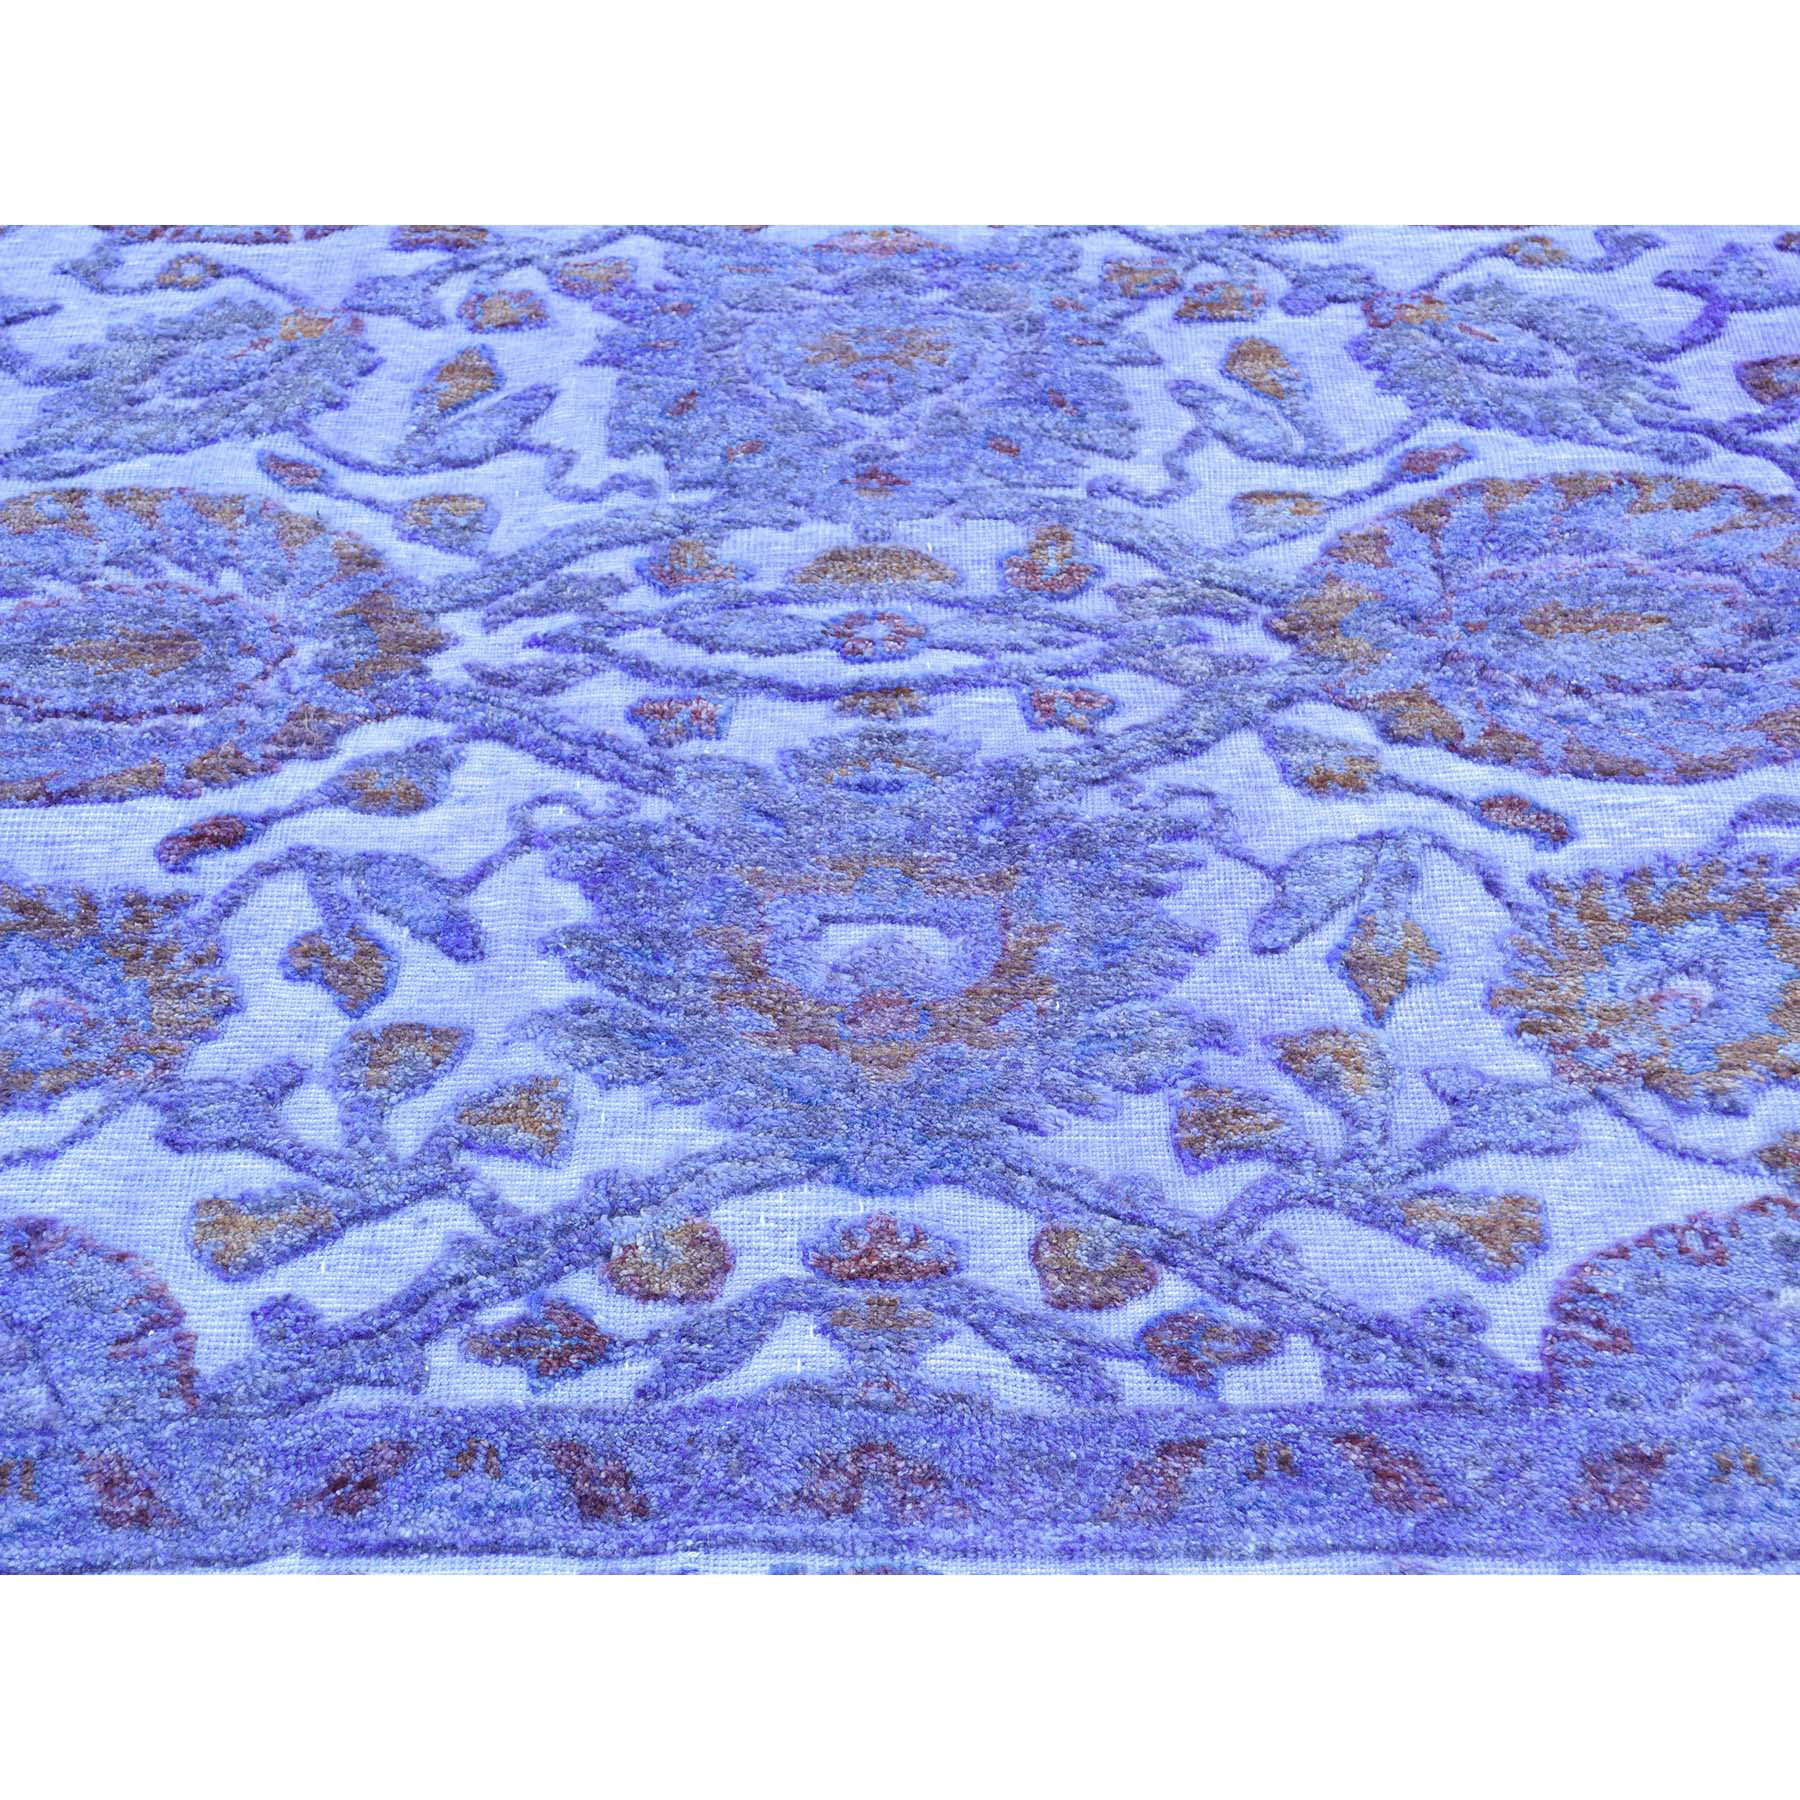 8-x10- Handmade High And Low Overdyed Barjasta Wool And Silk Rug 